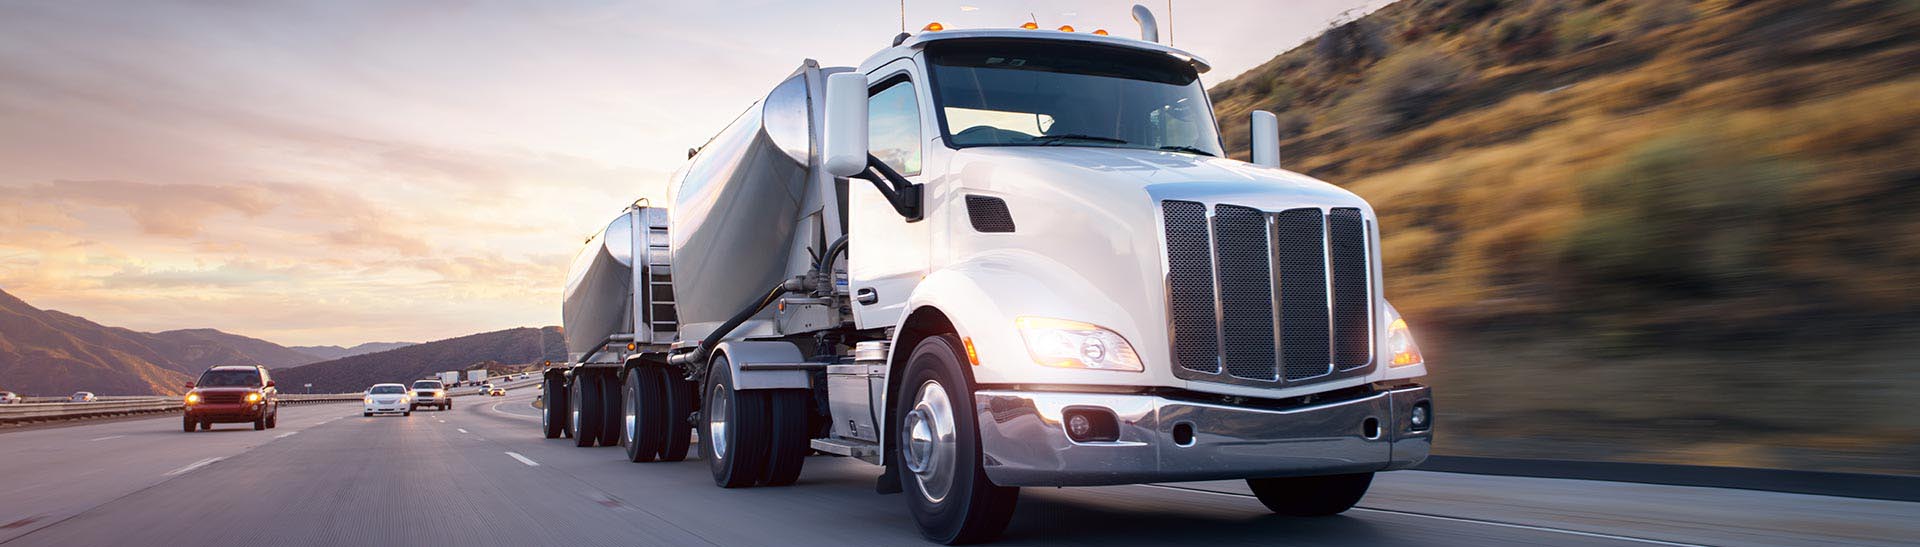 Inwood Trucking Company, Hauling Services and Trucking Services